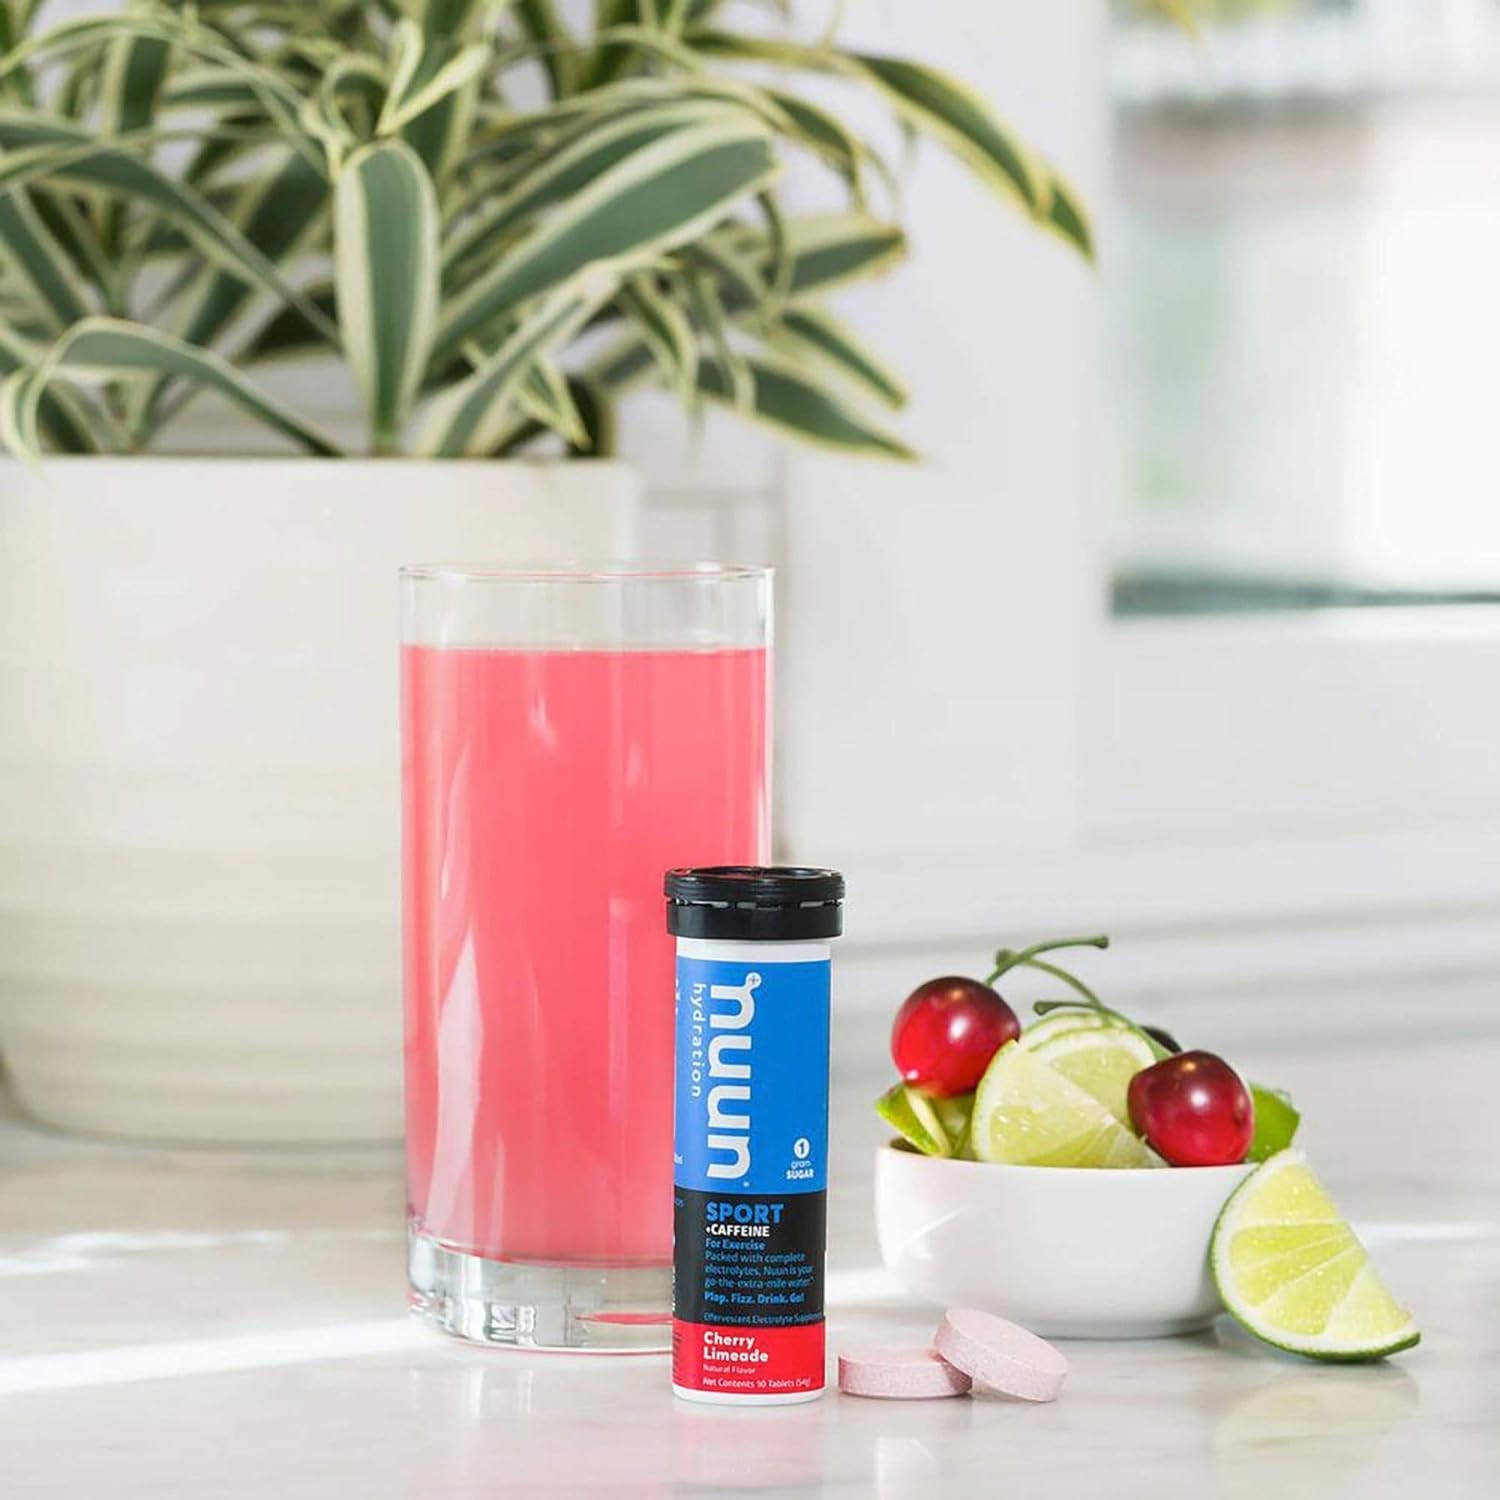 Nuun Sport + Caffeine Electrolyte Tablets for Proactive Hydration, Che